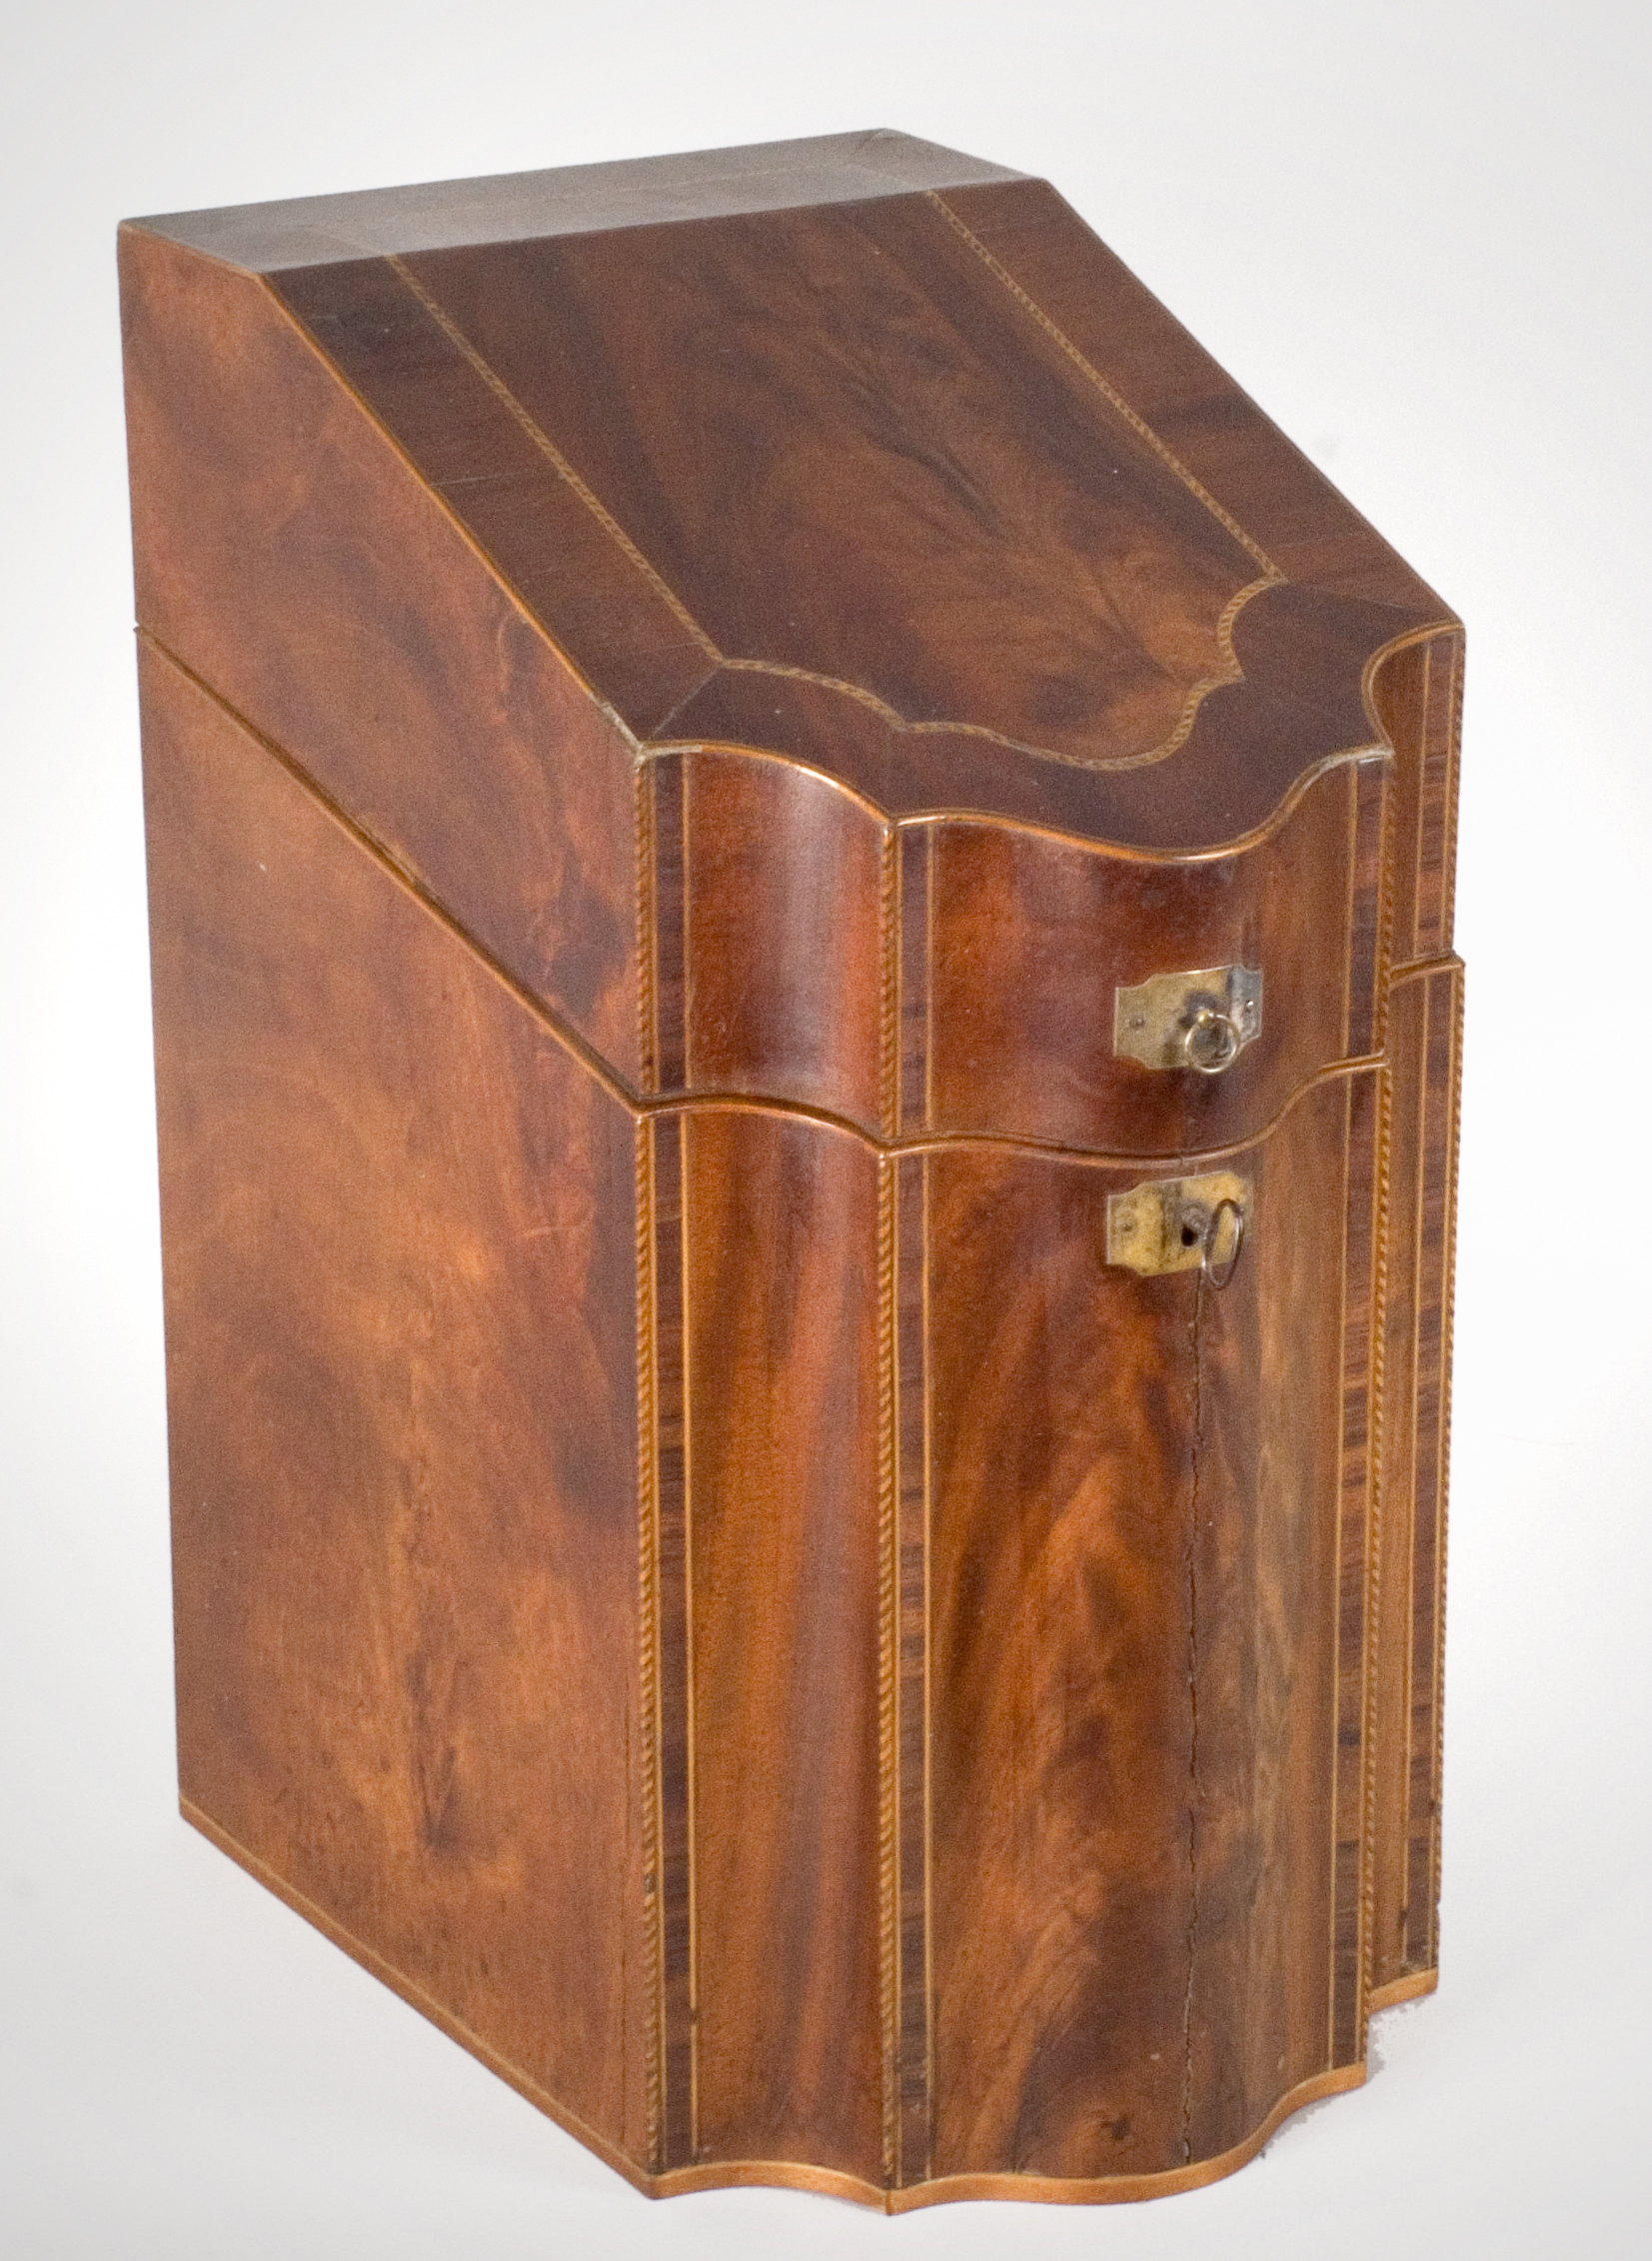 Knife Box, Serpentine Front with Sloping Lid<br />
Mahogany and various inlays, Image 1